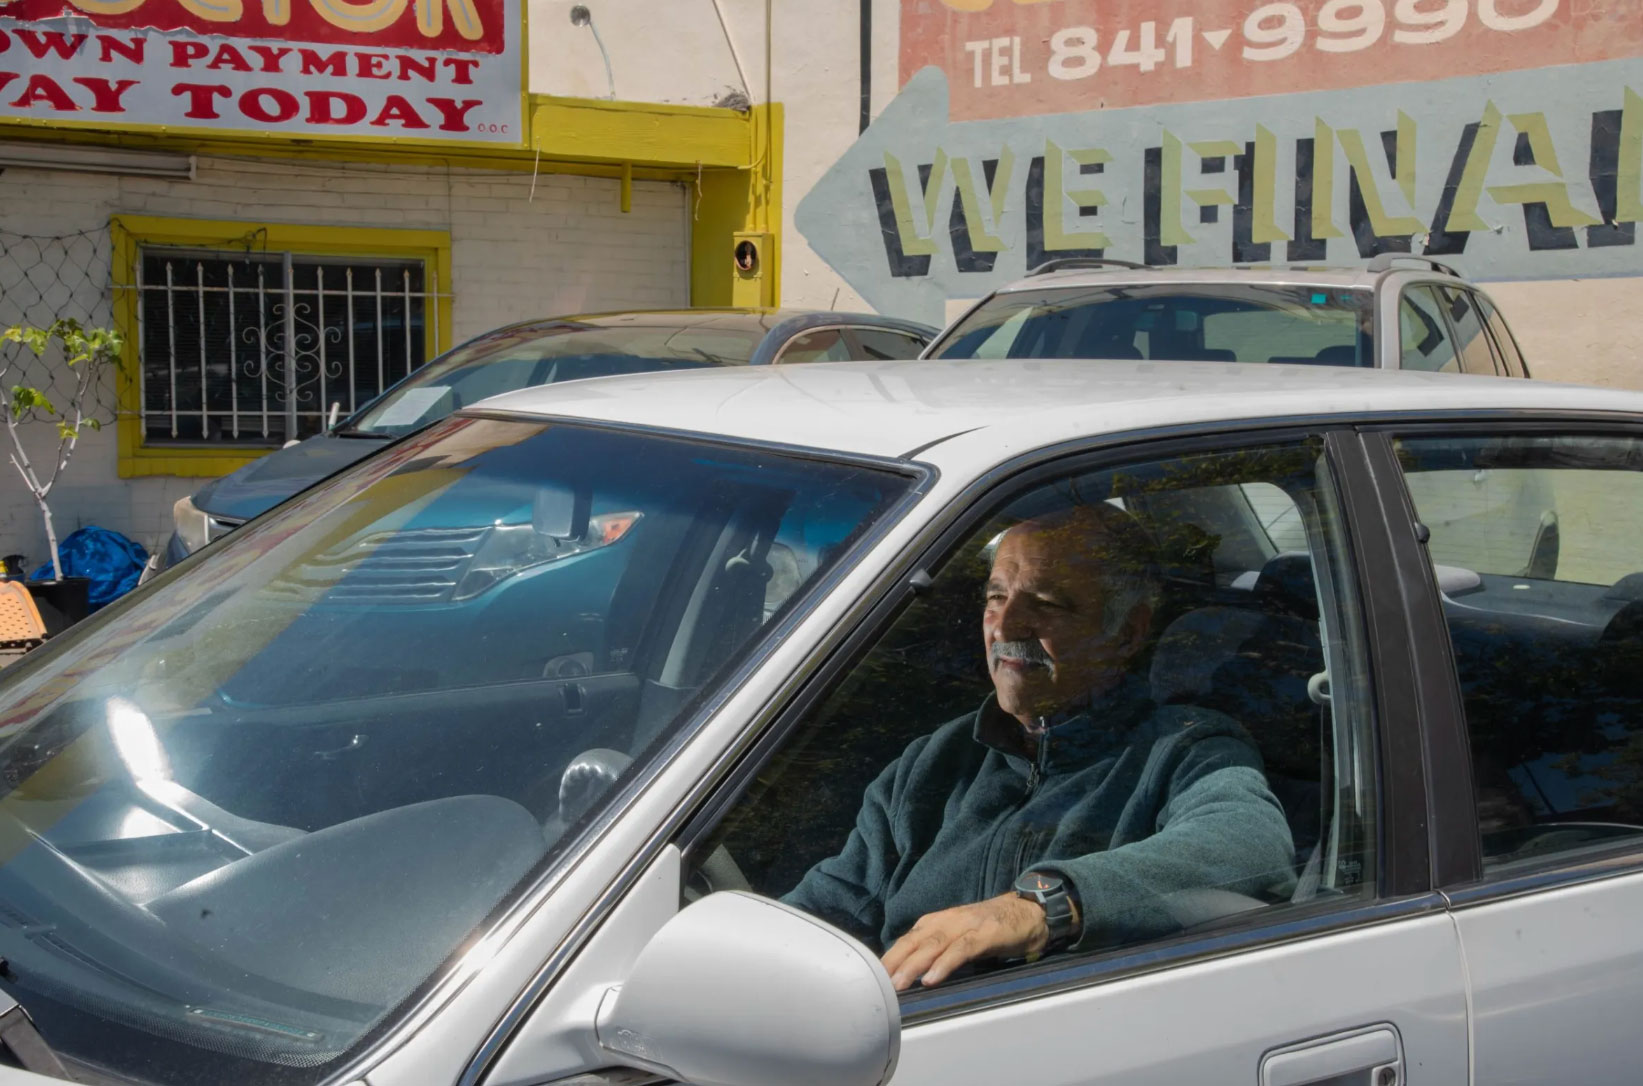 man sits inside car with window down, with car dealership signs in background